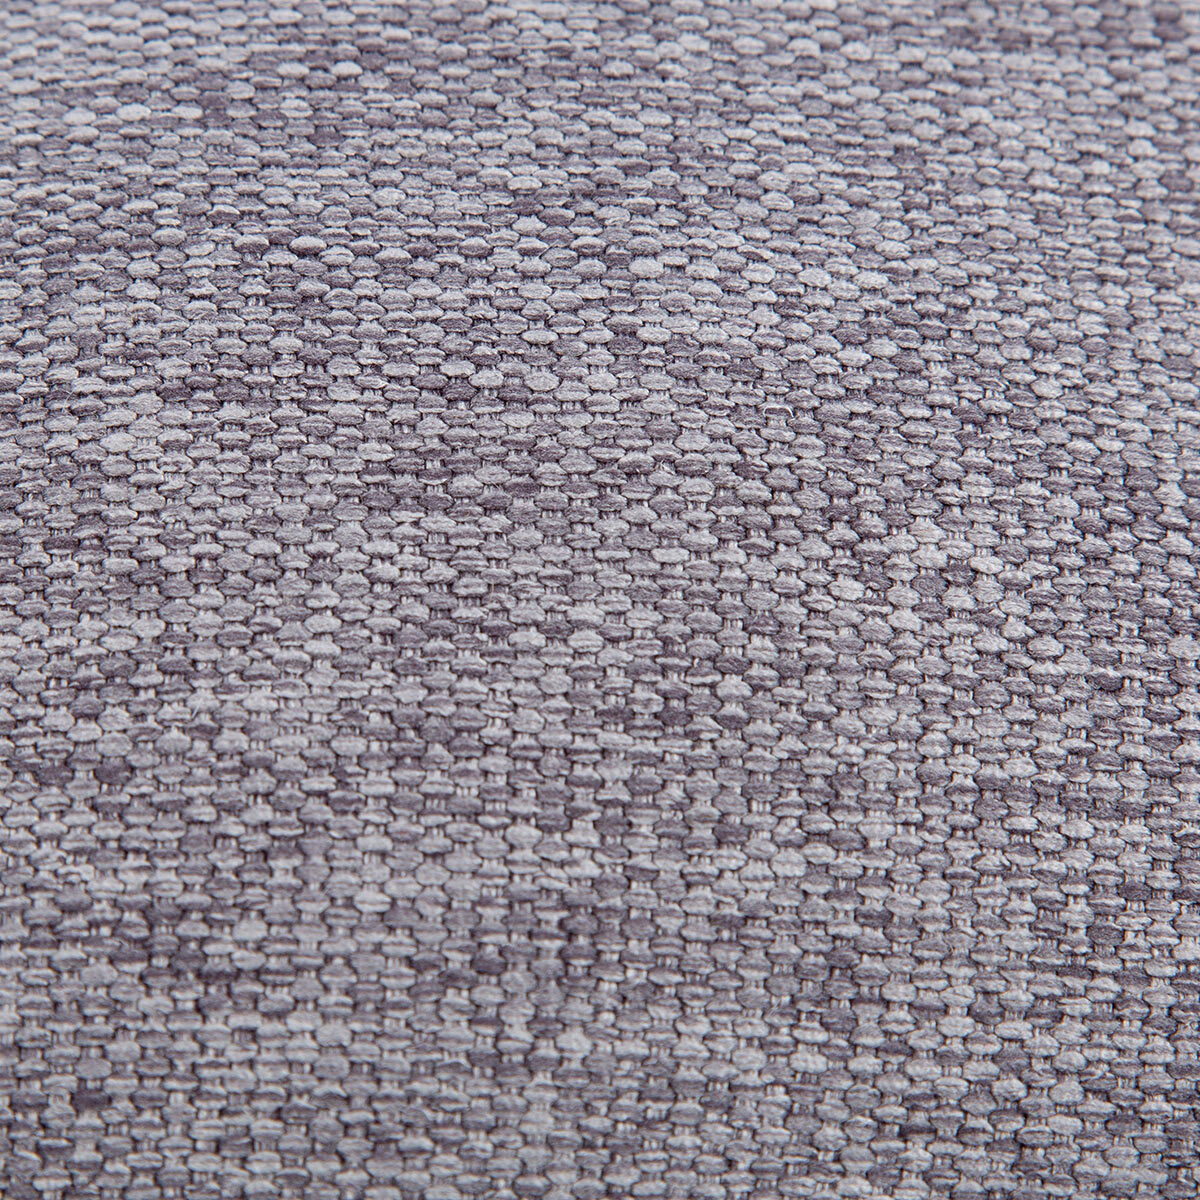 Close up image of fabric of pet bed